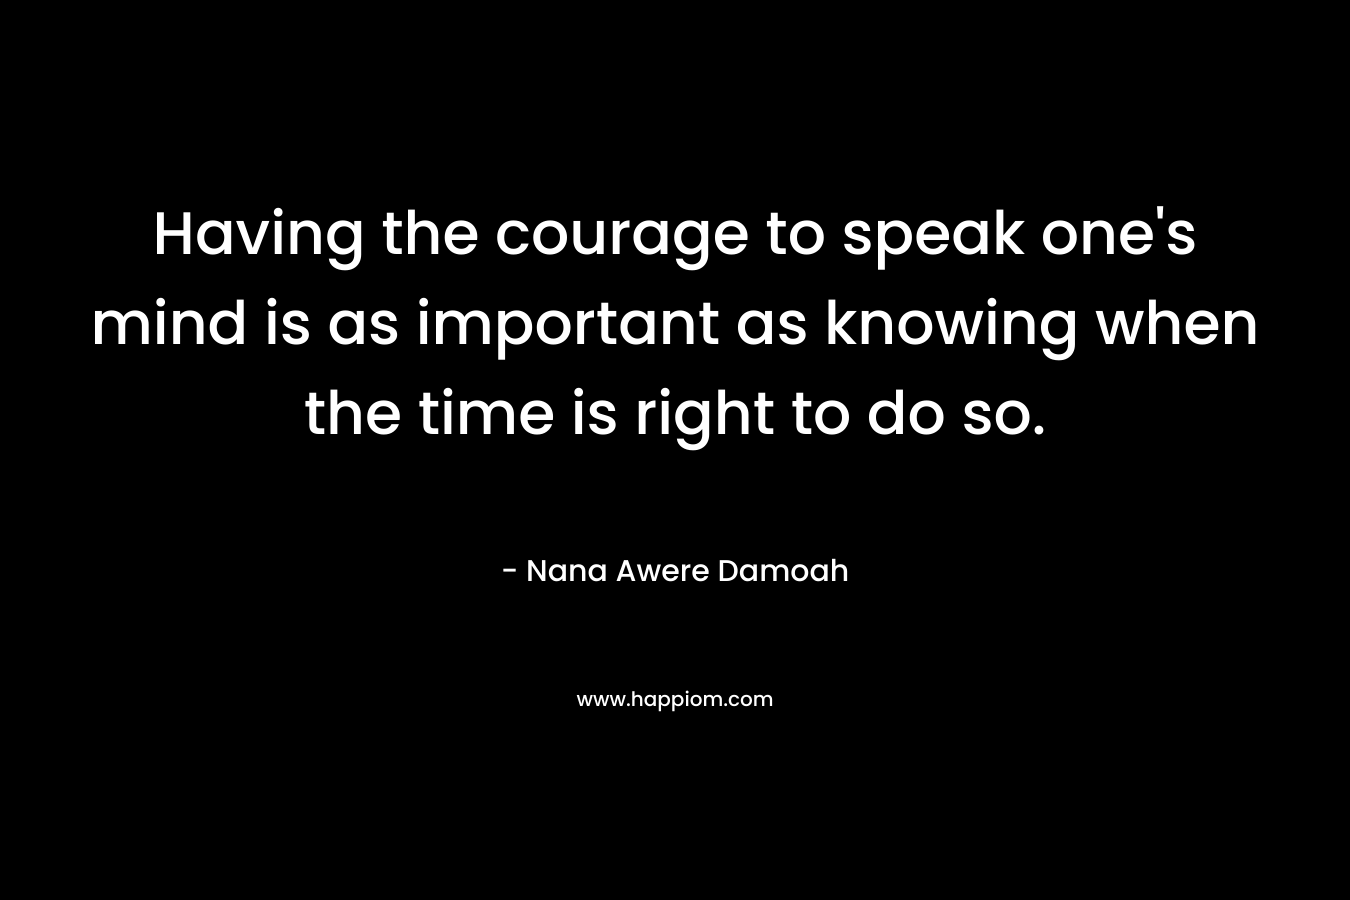 Having the courage to speak one's mind is as important as knowing when the time is right to do so.